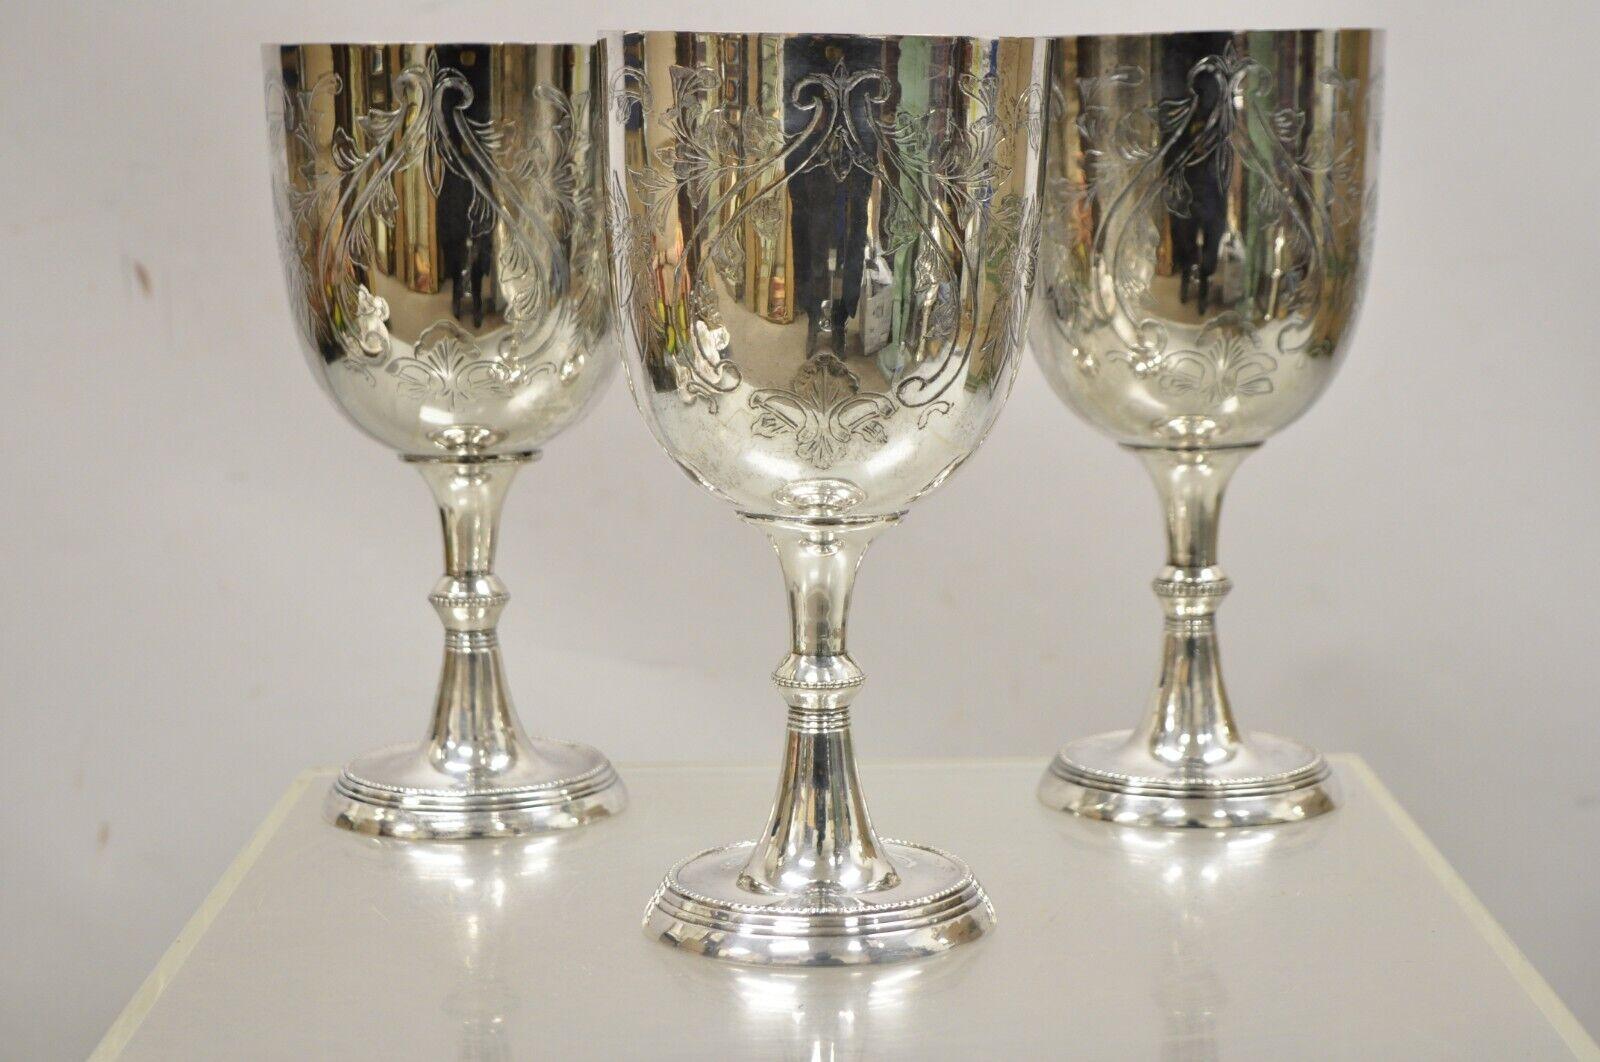 Vintage Victorian style silver plated large etched wine goblet cup - set of 3. Item features nice large size, etched leafy scroll design, very nice vintage set. circa Mid-20th Century. Measurements: 10.25